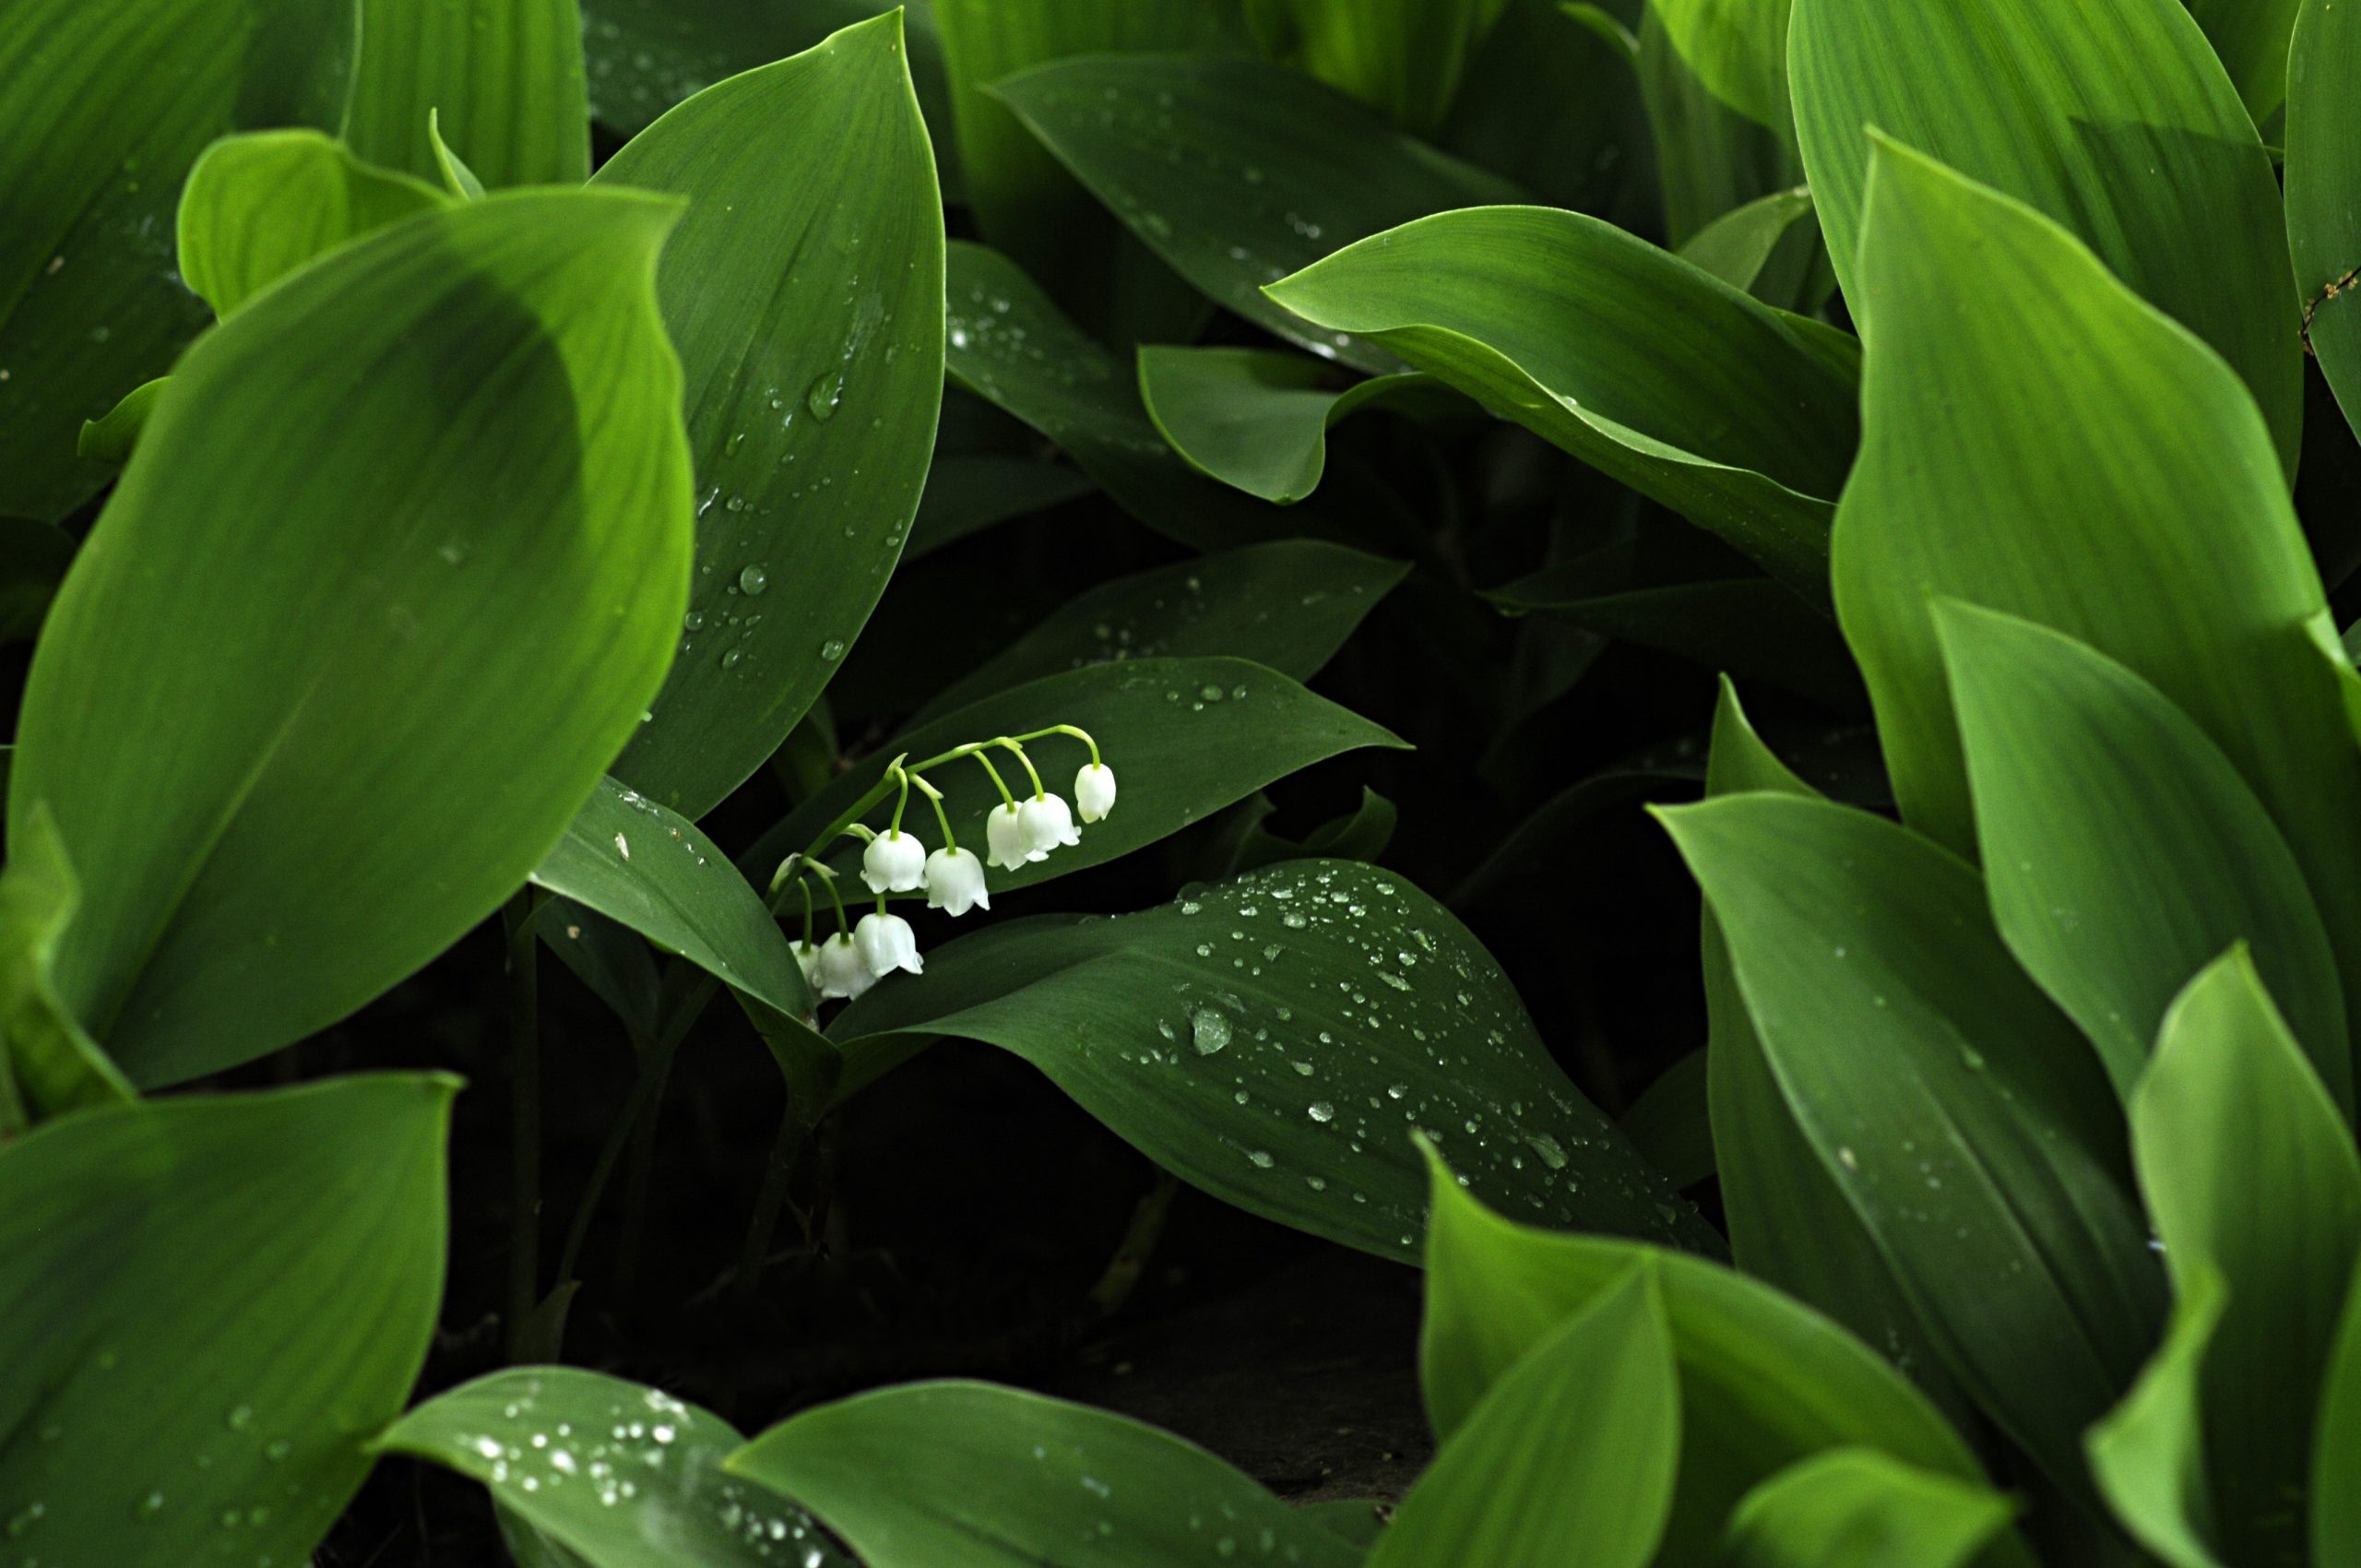  Expert Tips on How to Get Rid of Lily of the Valley